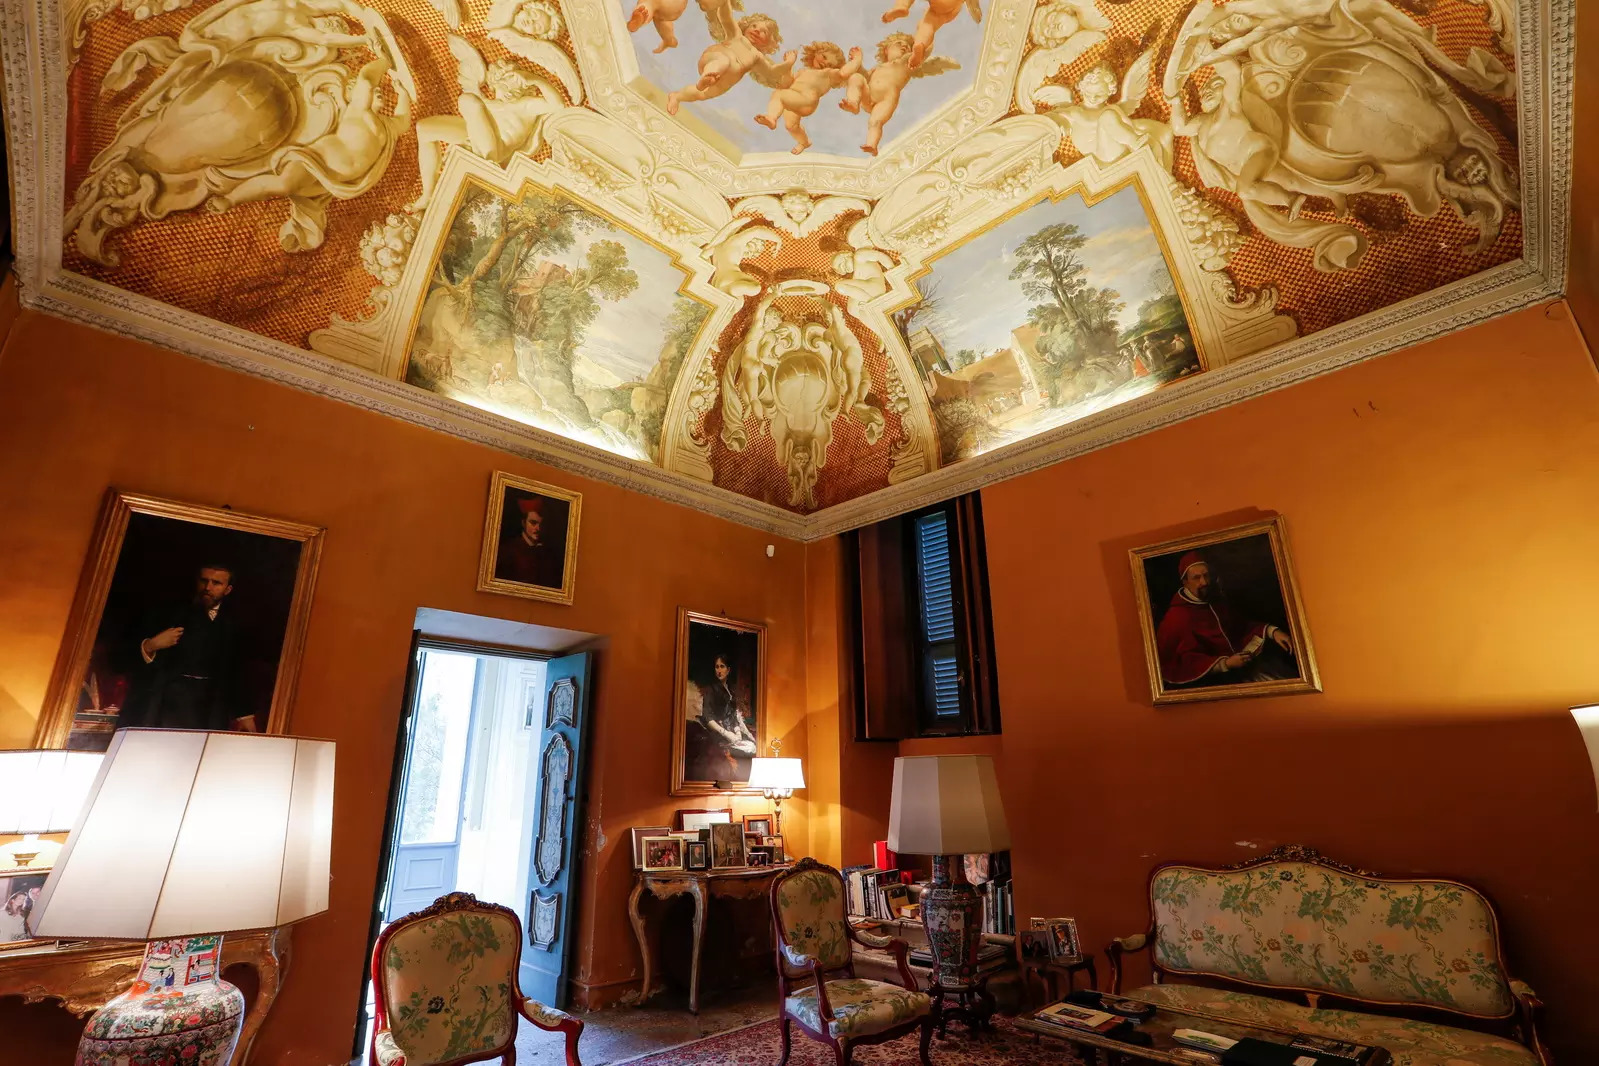 A general view shows a room, with frescoes on the ceiling by Italian artists including Guercino and Domenichino, inside Villa Aurora.